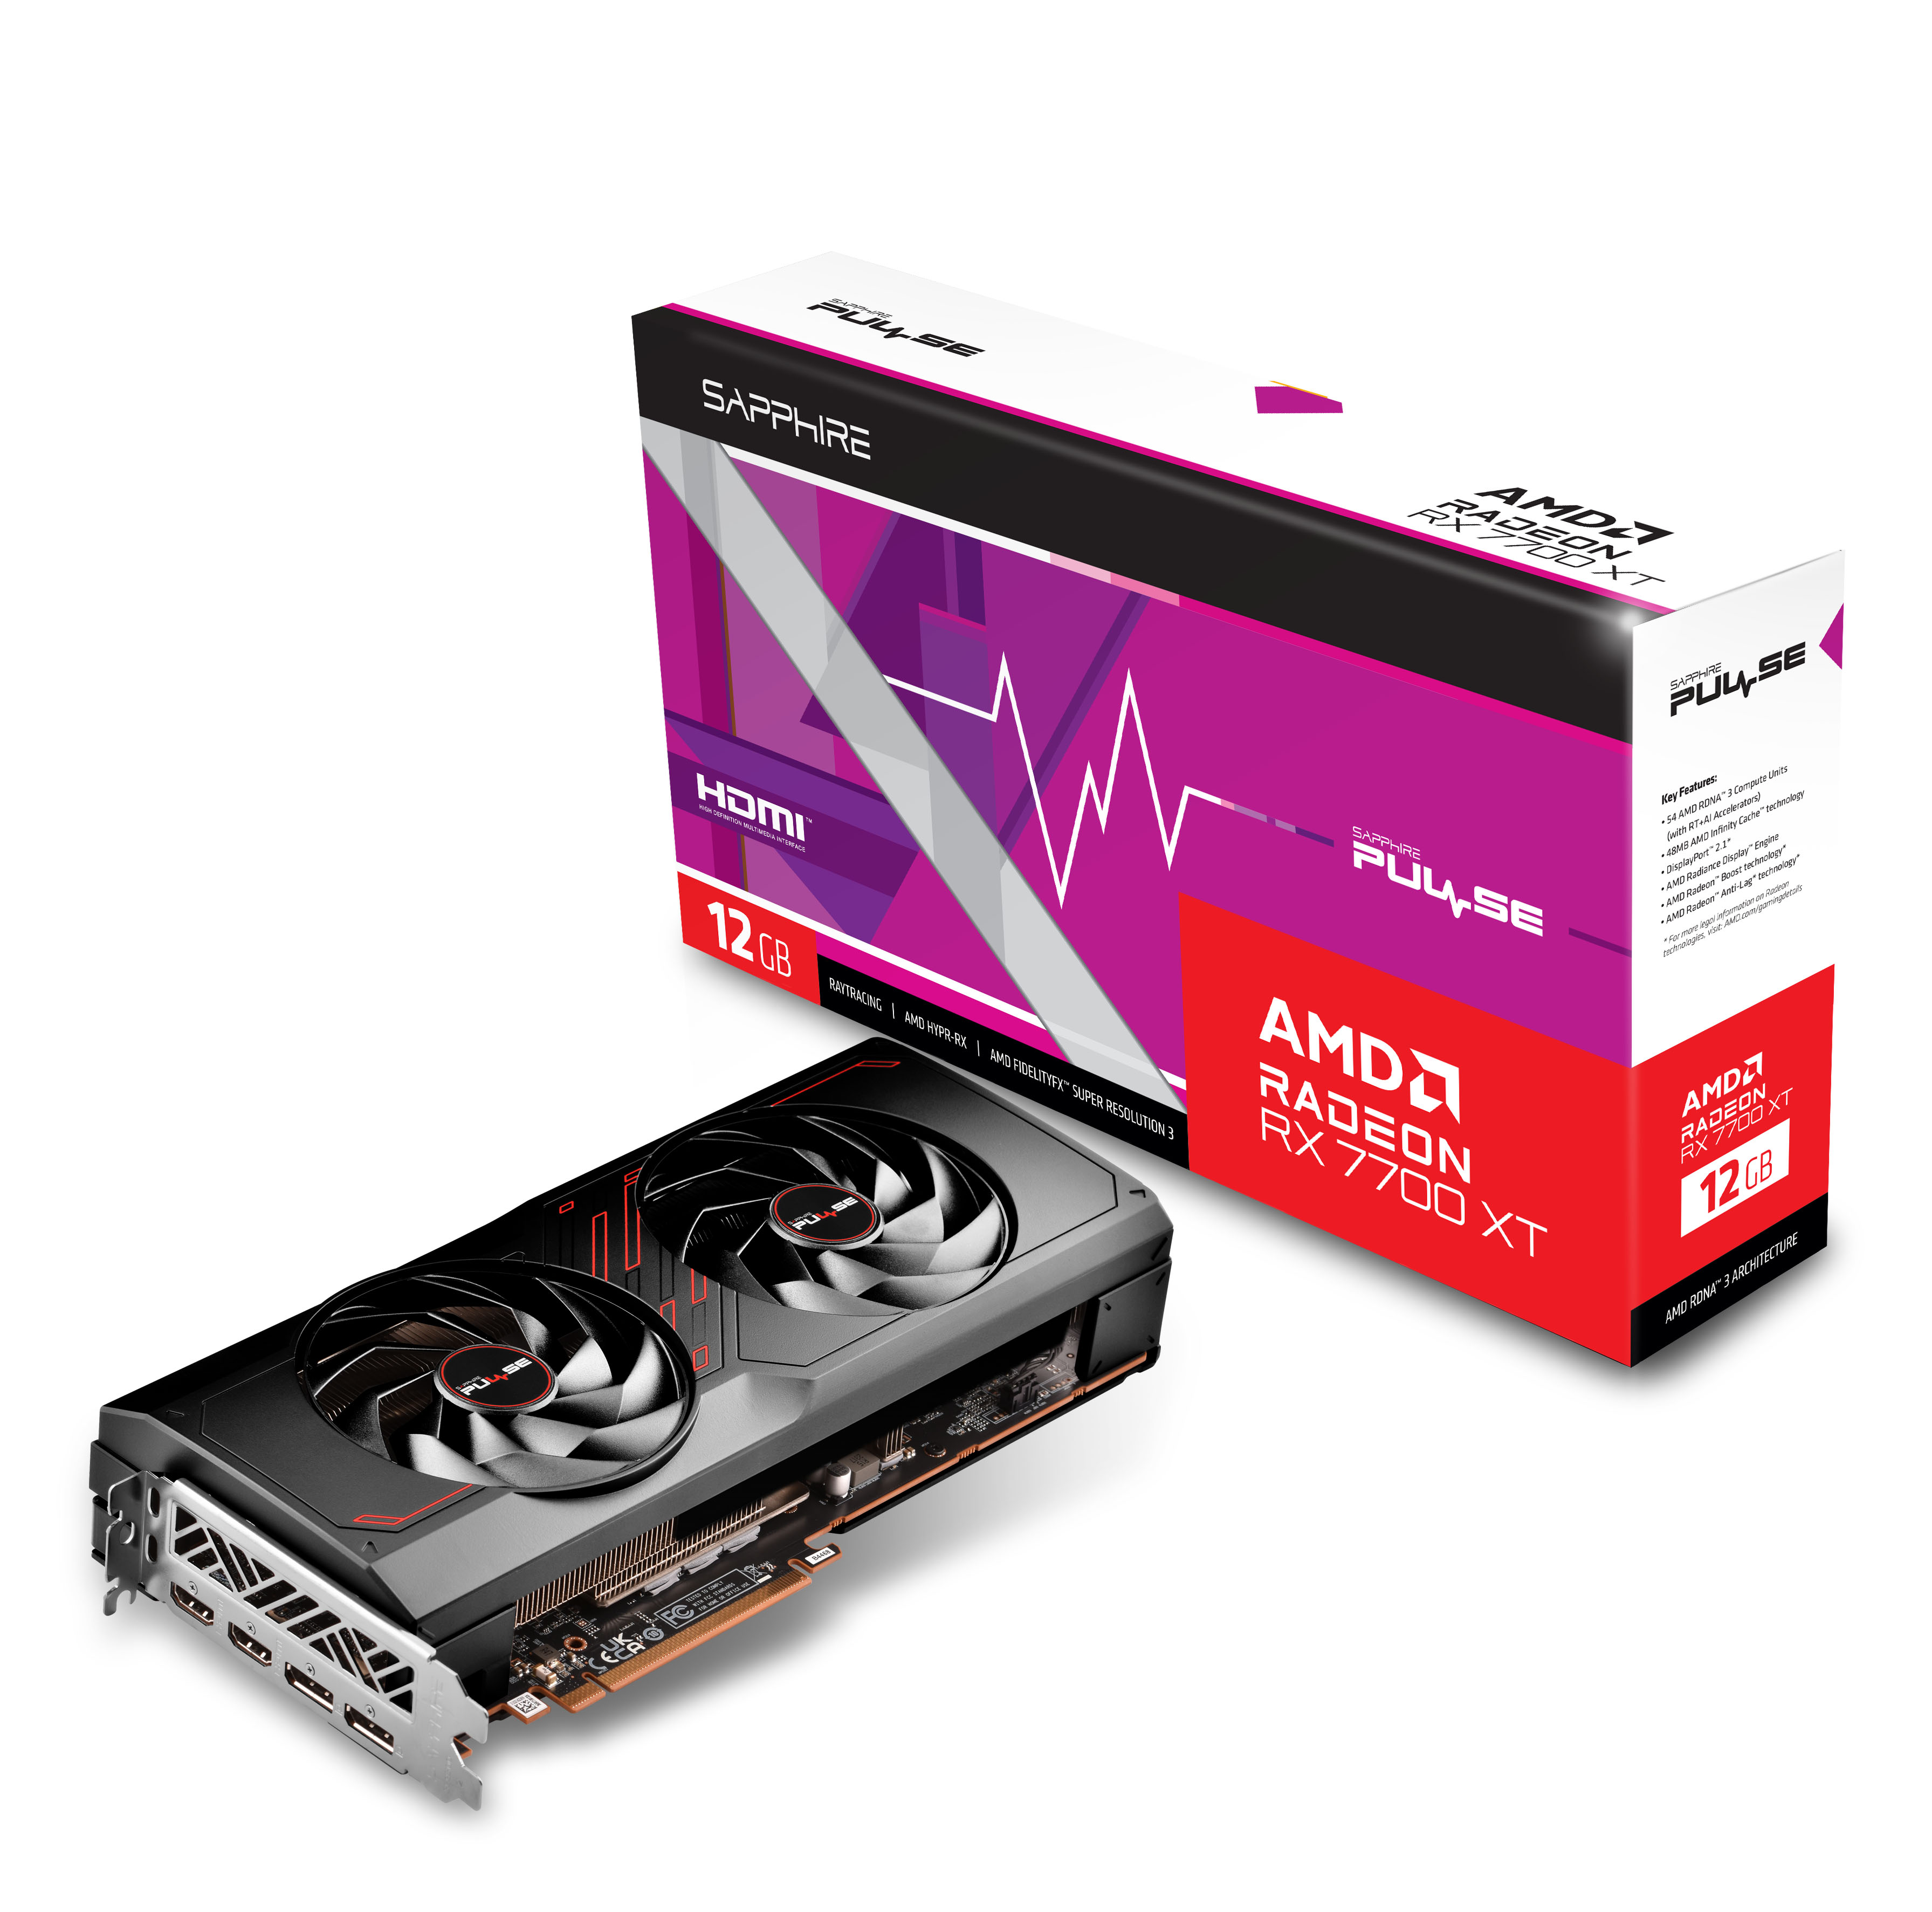 Sapphire - SAPPHIRE PULSE AMD Radeon™ RX 7700 XT Gaming Graphics Card with 12GB GDDR6, AMD RDNA™ 3 architecture